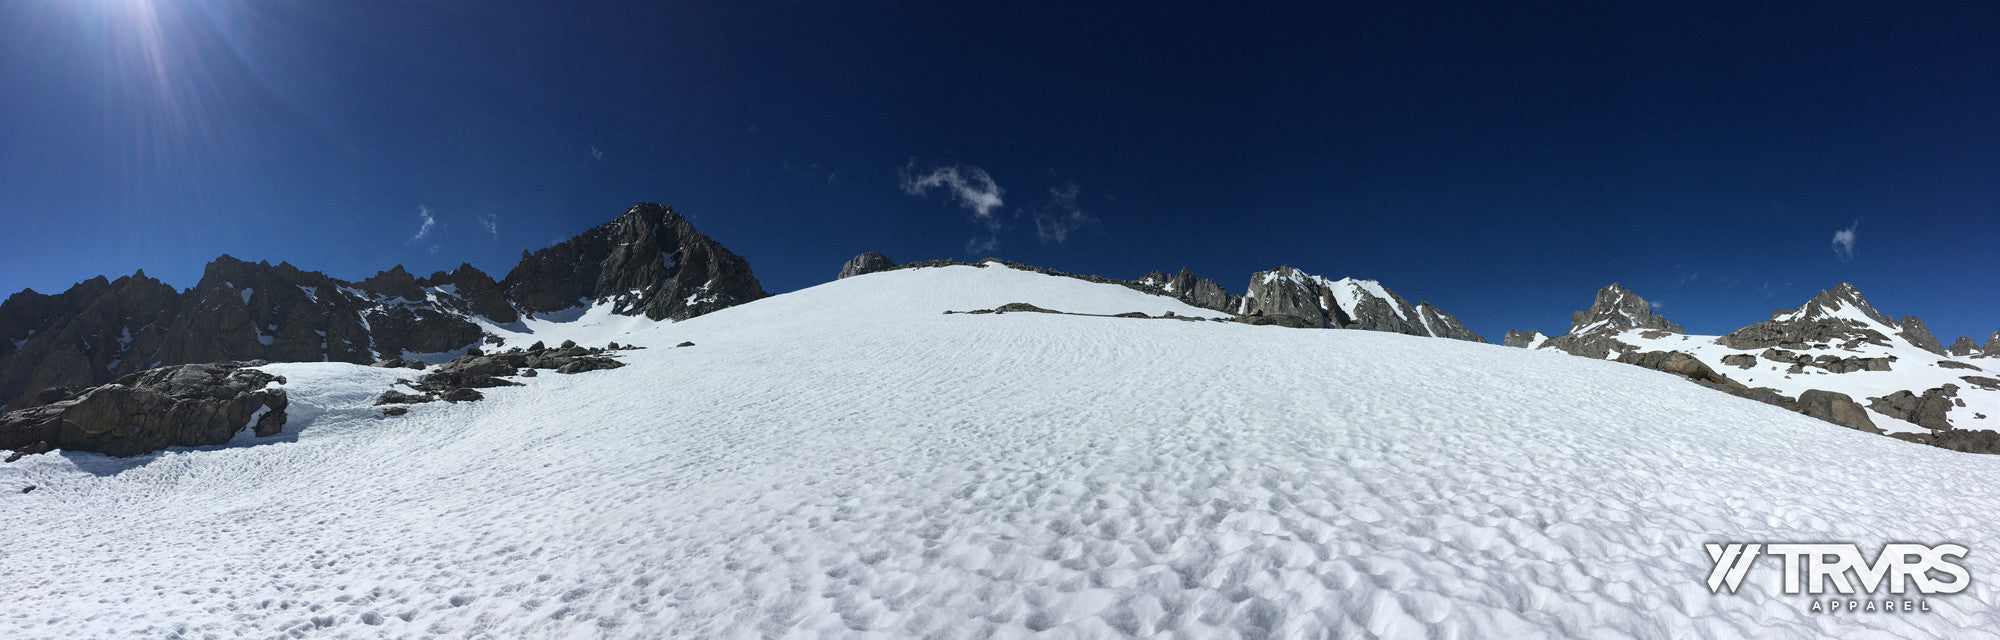 A Snowy Slope Approaching Palisade Glacier - Big Pine Lakes | TRVRS APPAREL